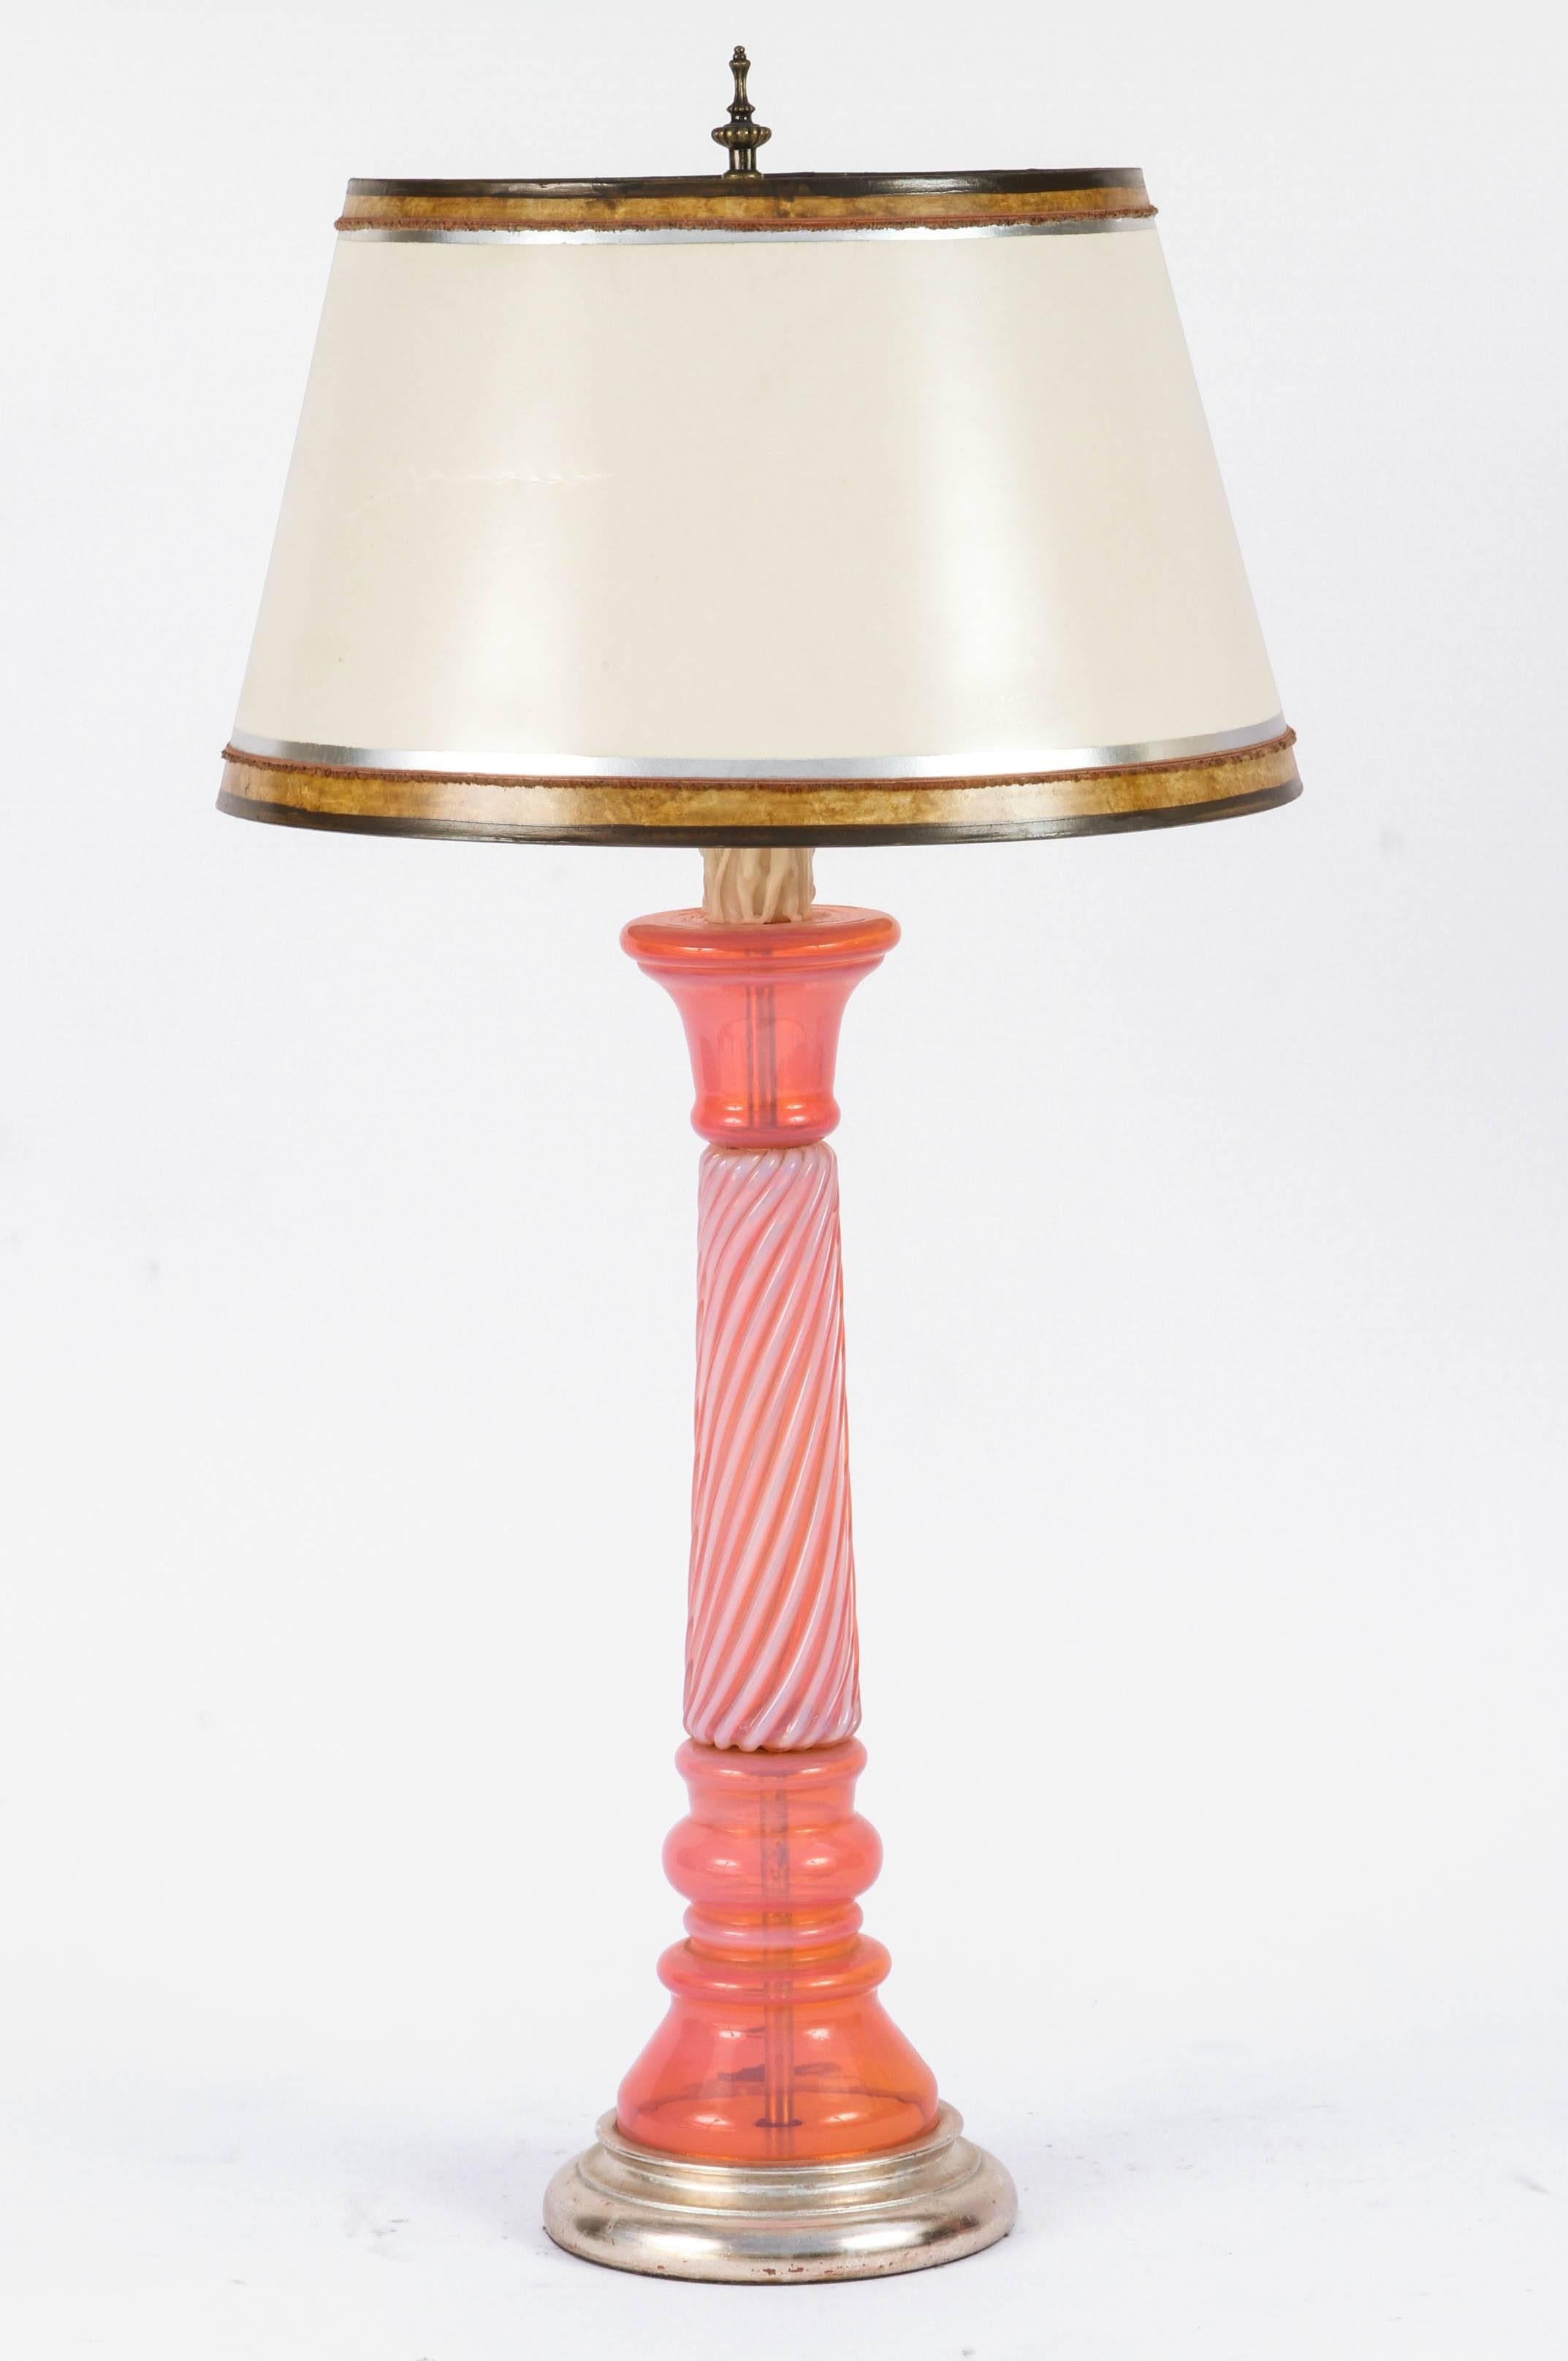 Pair of Mid-Century coral opaline Murano lamp on silver leaf wooden bases. The shades are included and are handcrafted of parchment paper. They are hand gilded and decorated. The lamps have been newly wired.